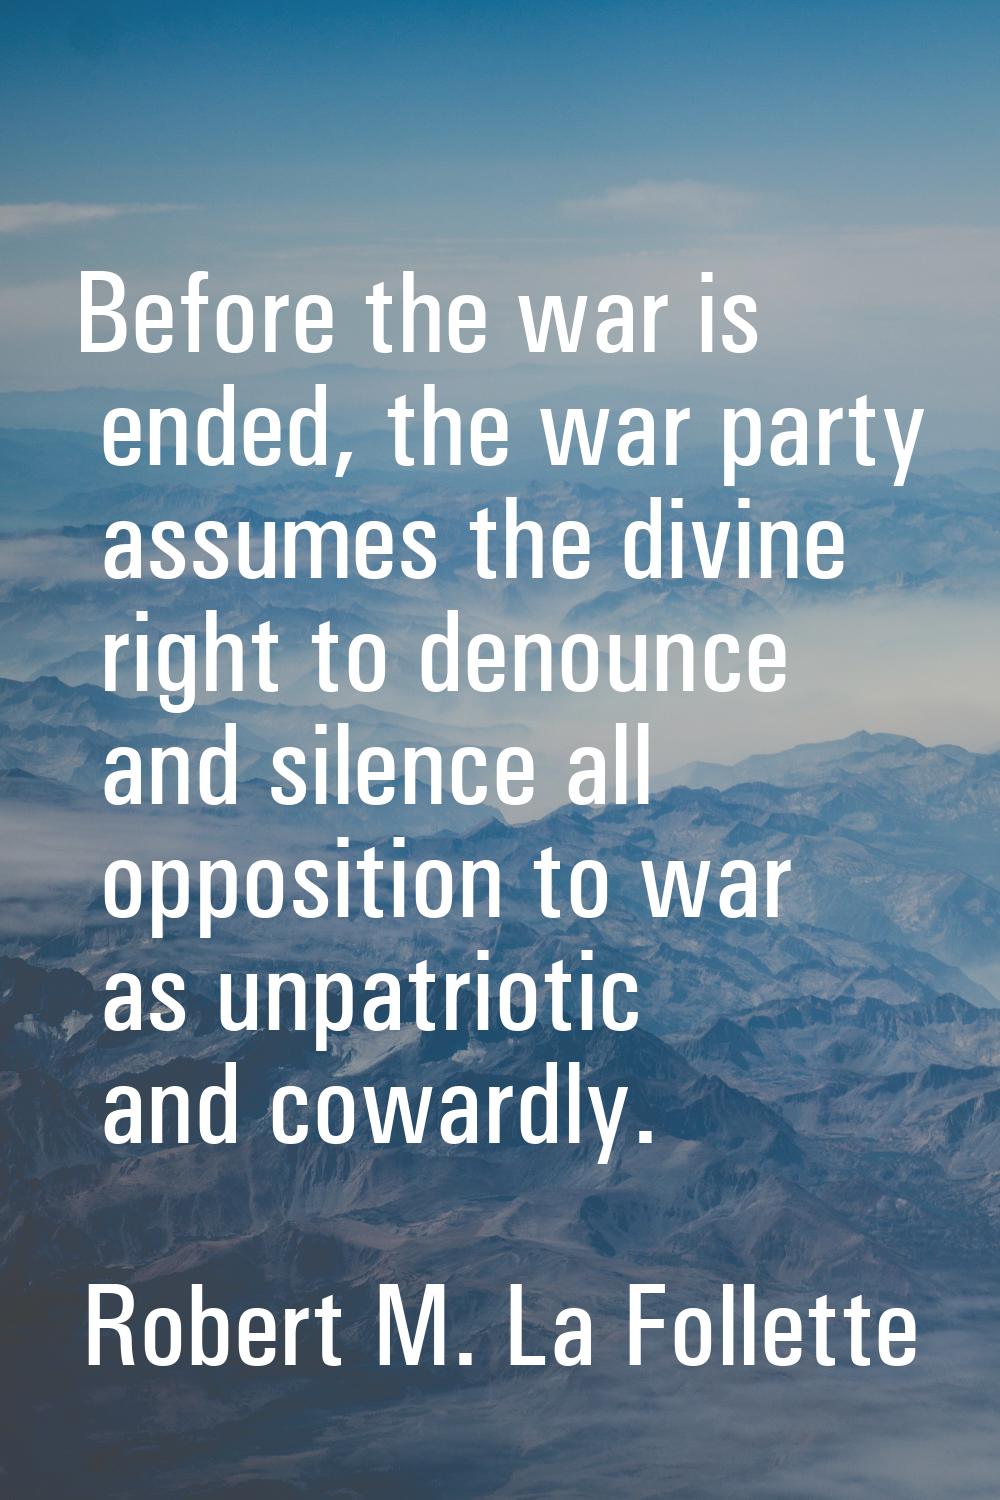 Before the war is ended, the war party assumes the divine right to denounce and silence all opposit